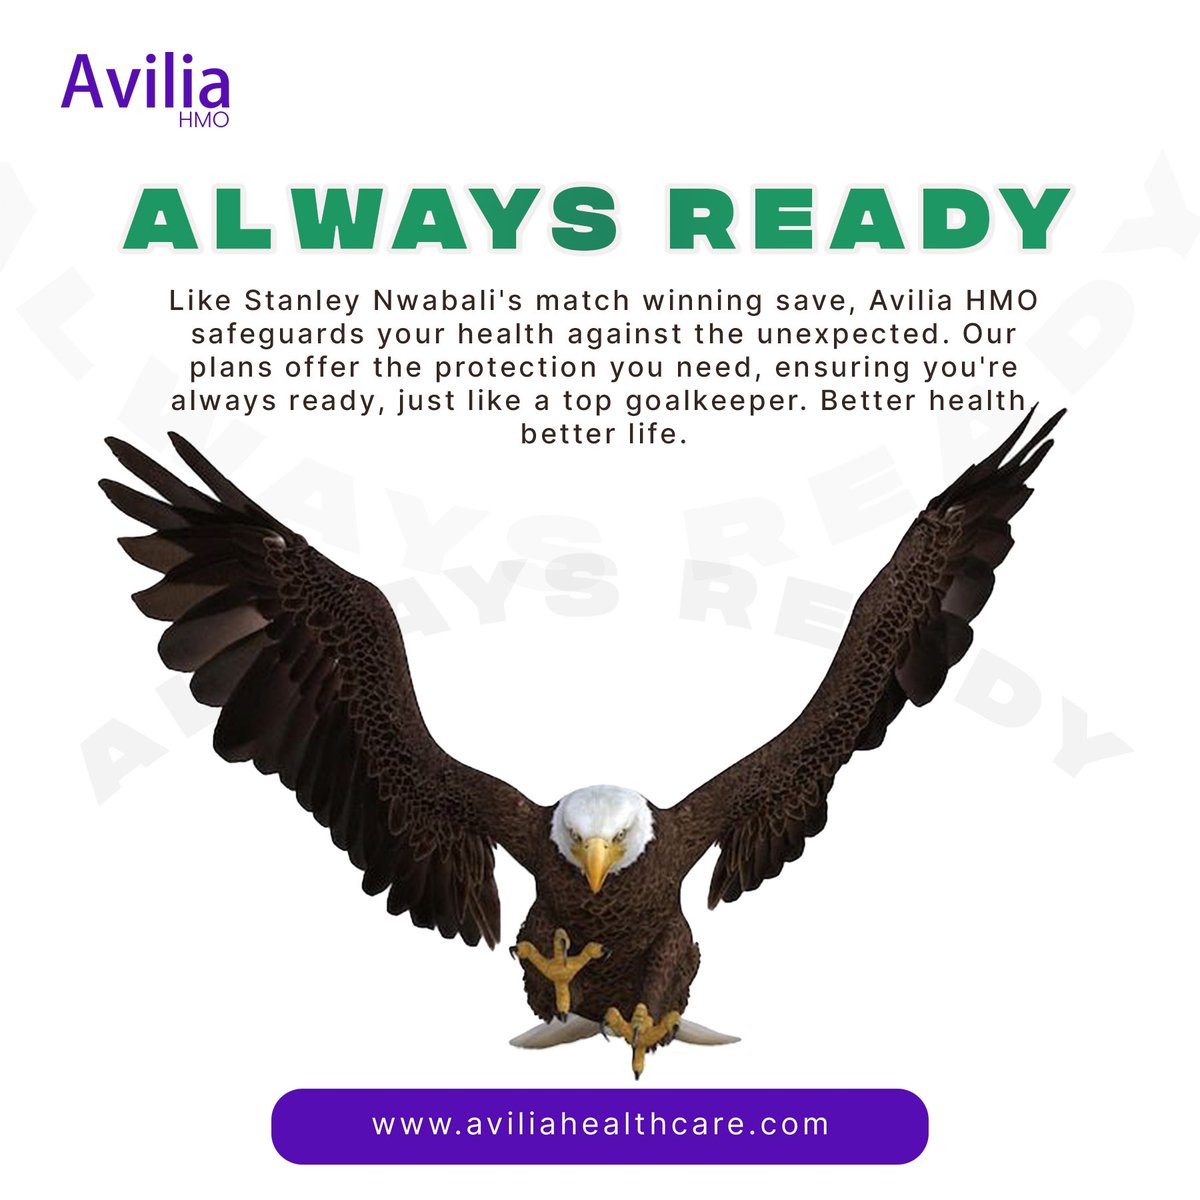 Choose Avilia HMO today for peace of mind tomorrow.
Better health, better life.
#HealthcareNigeria #HMOinNigeria #HealthInsurance
#NigerianHealth
#WellnessWednesday
#HealthCoverage #NaijaHealth
#HealthCareForAll
#HealthyLiving #NaijaWellness
#HealthcareProviders
#AFCON2024